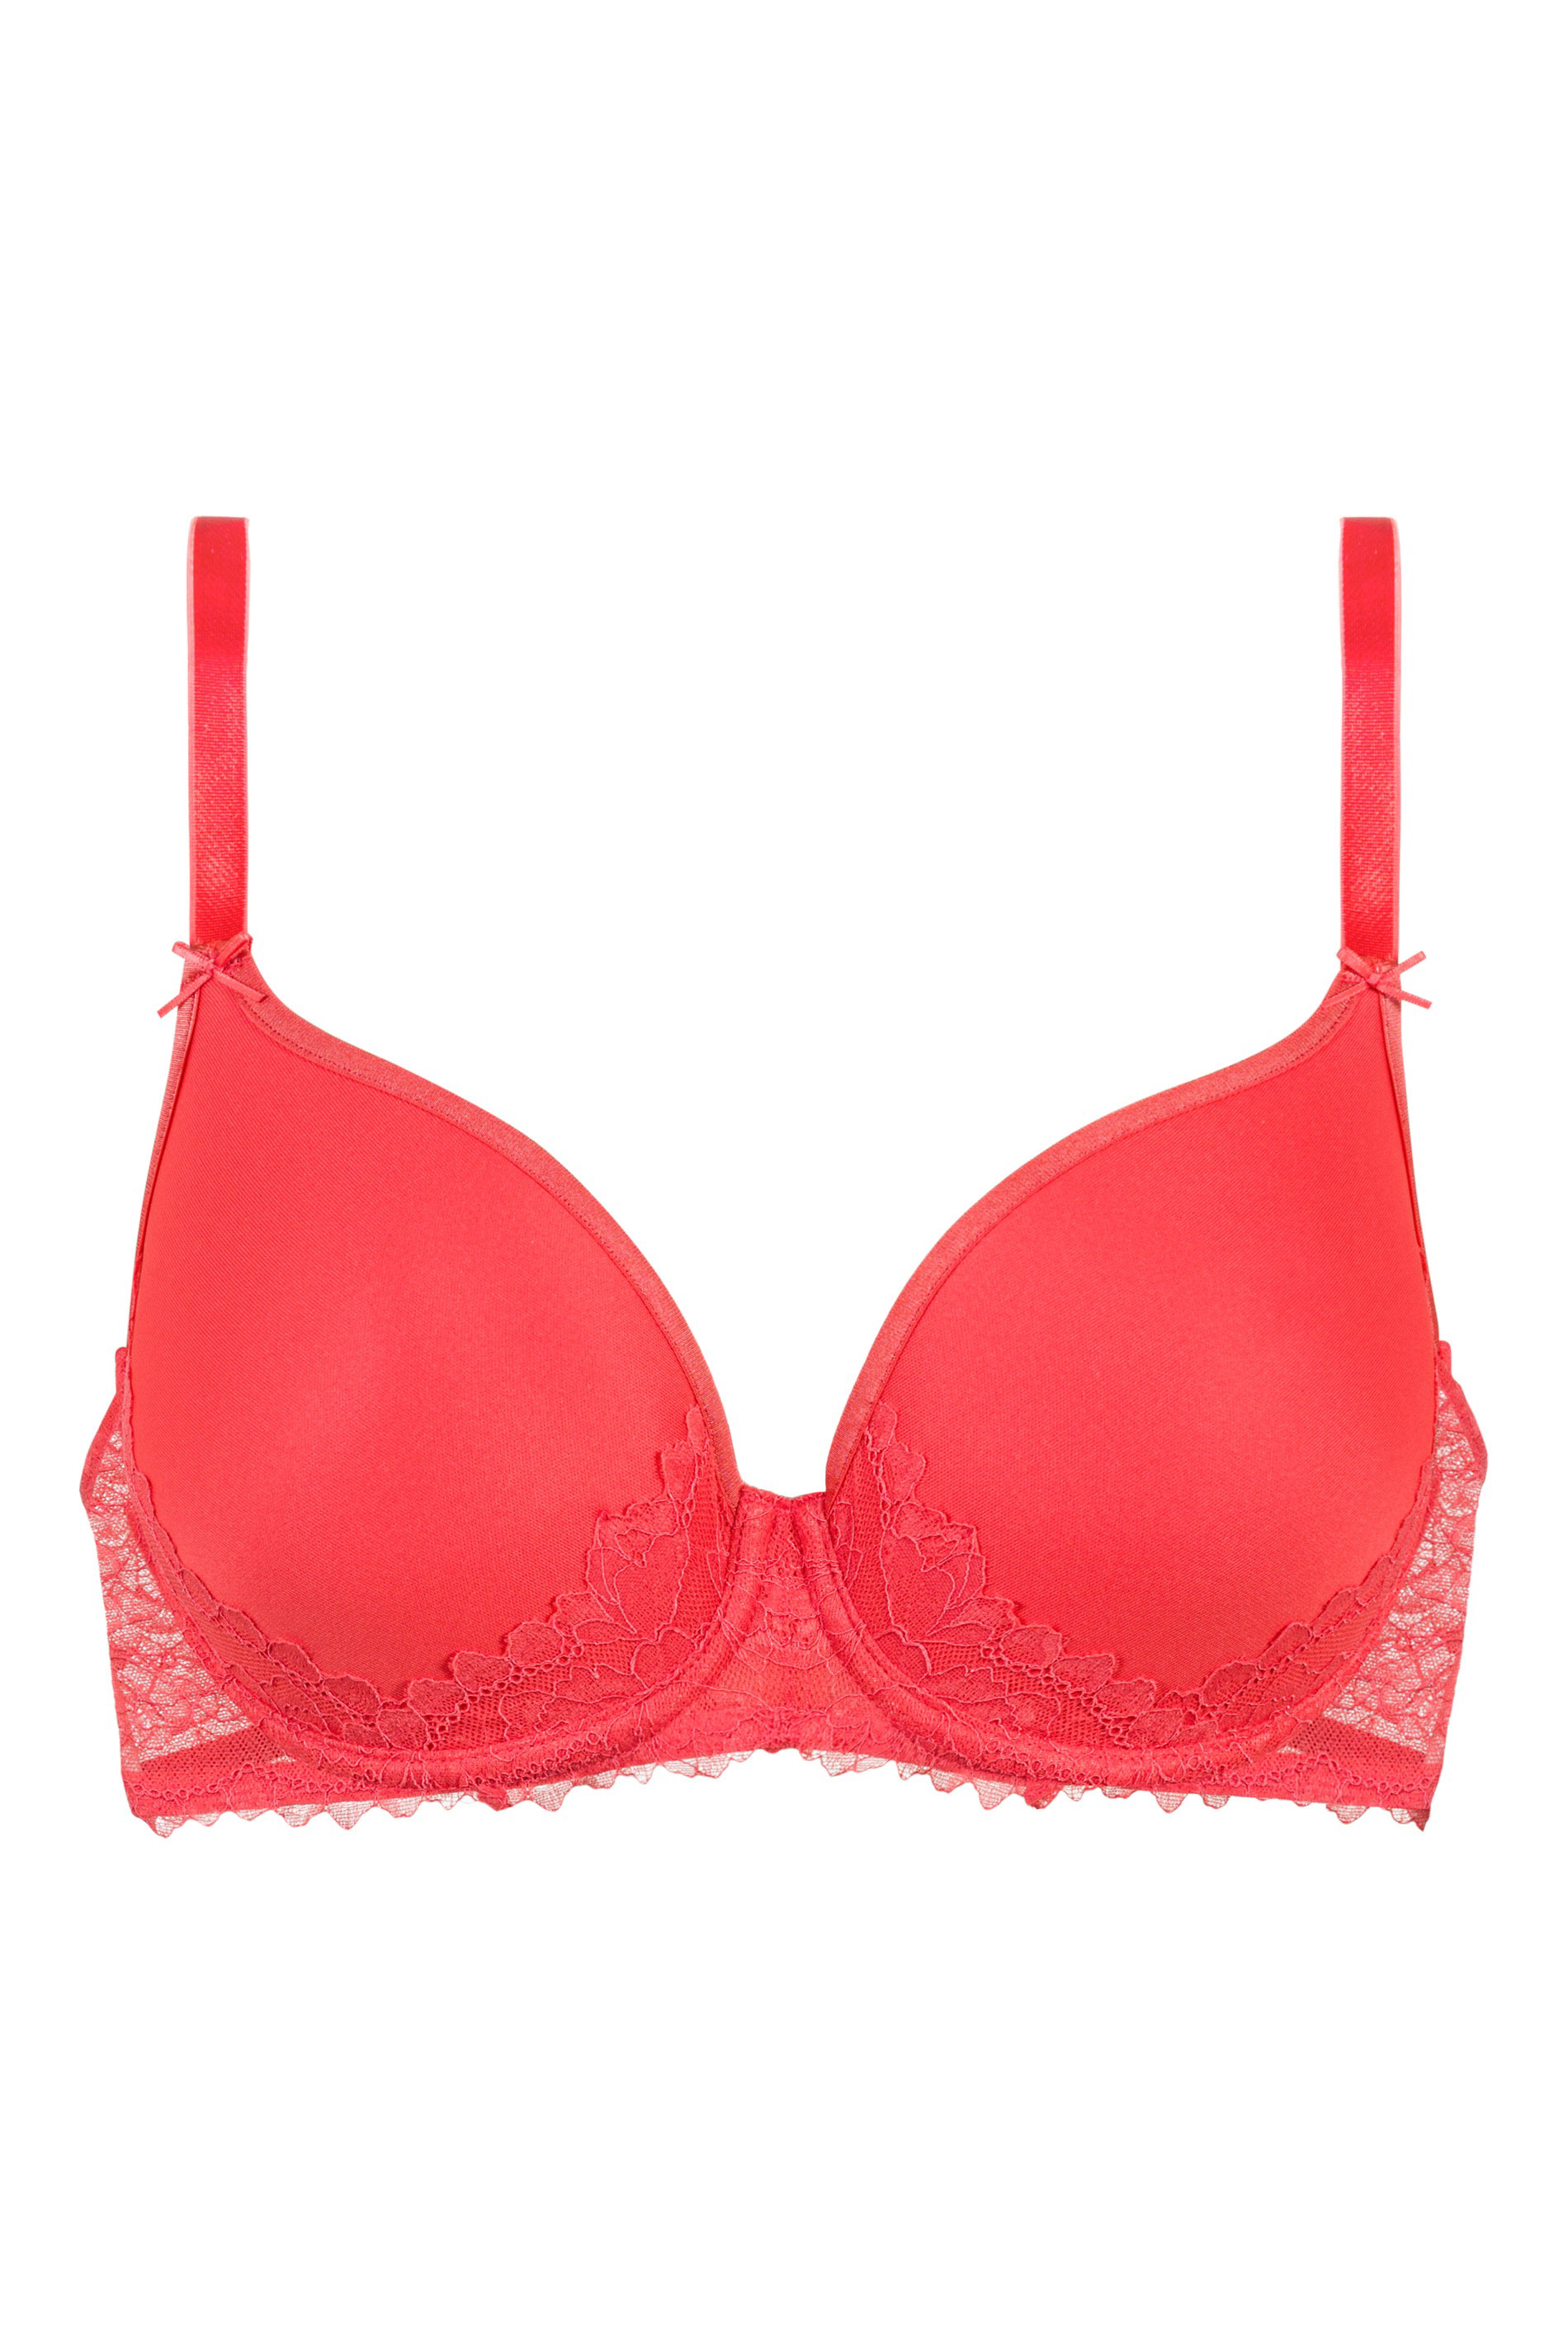 Spacer bra | Full Cup Serie Fabulous Cut Out | mey®